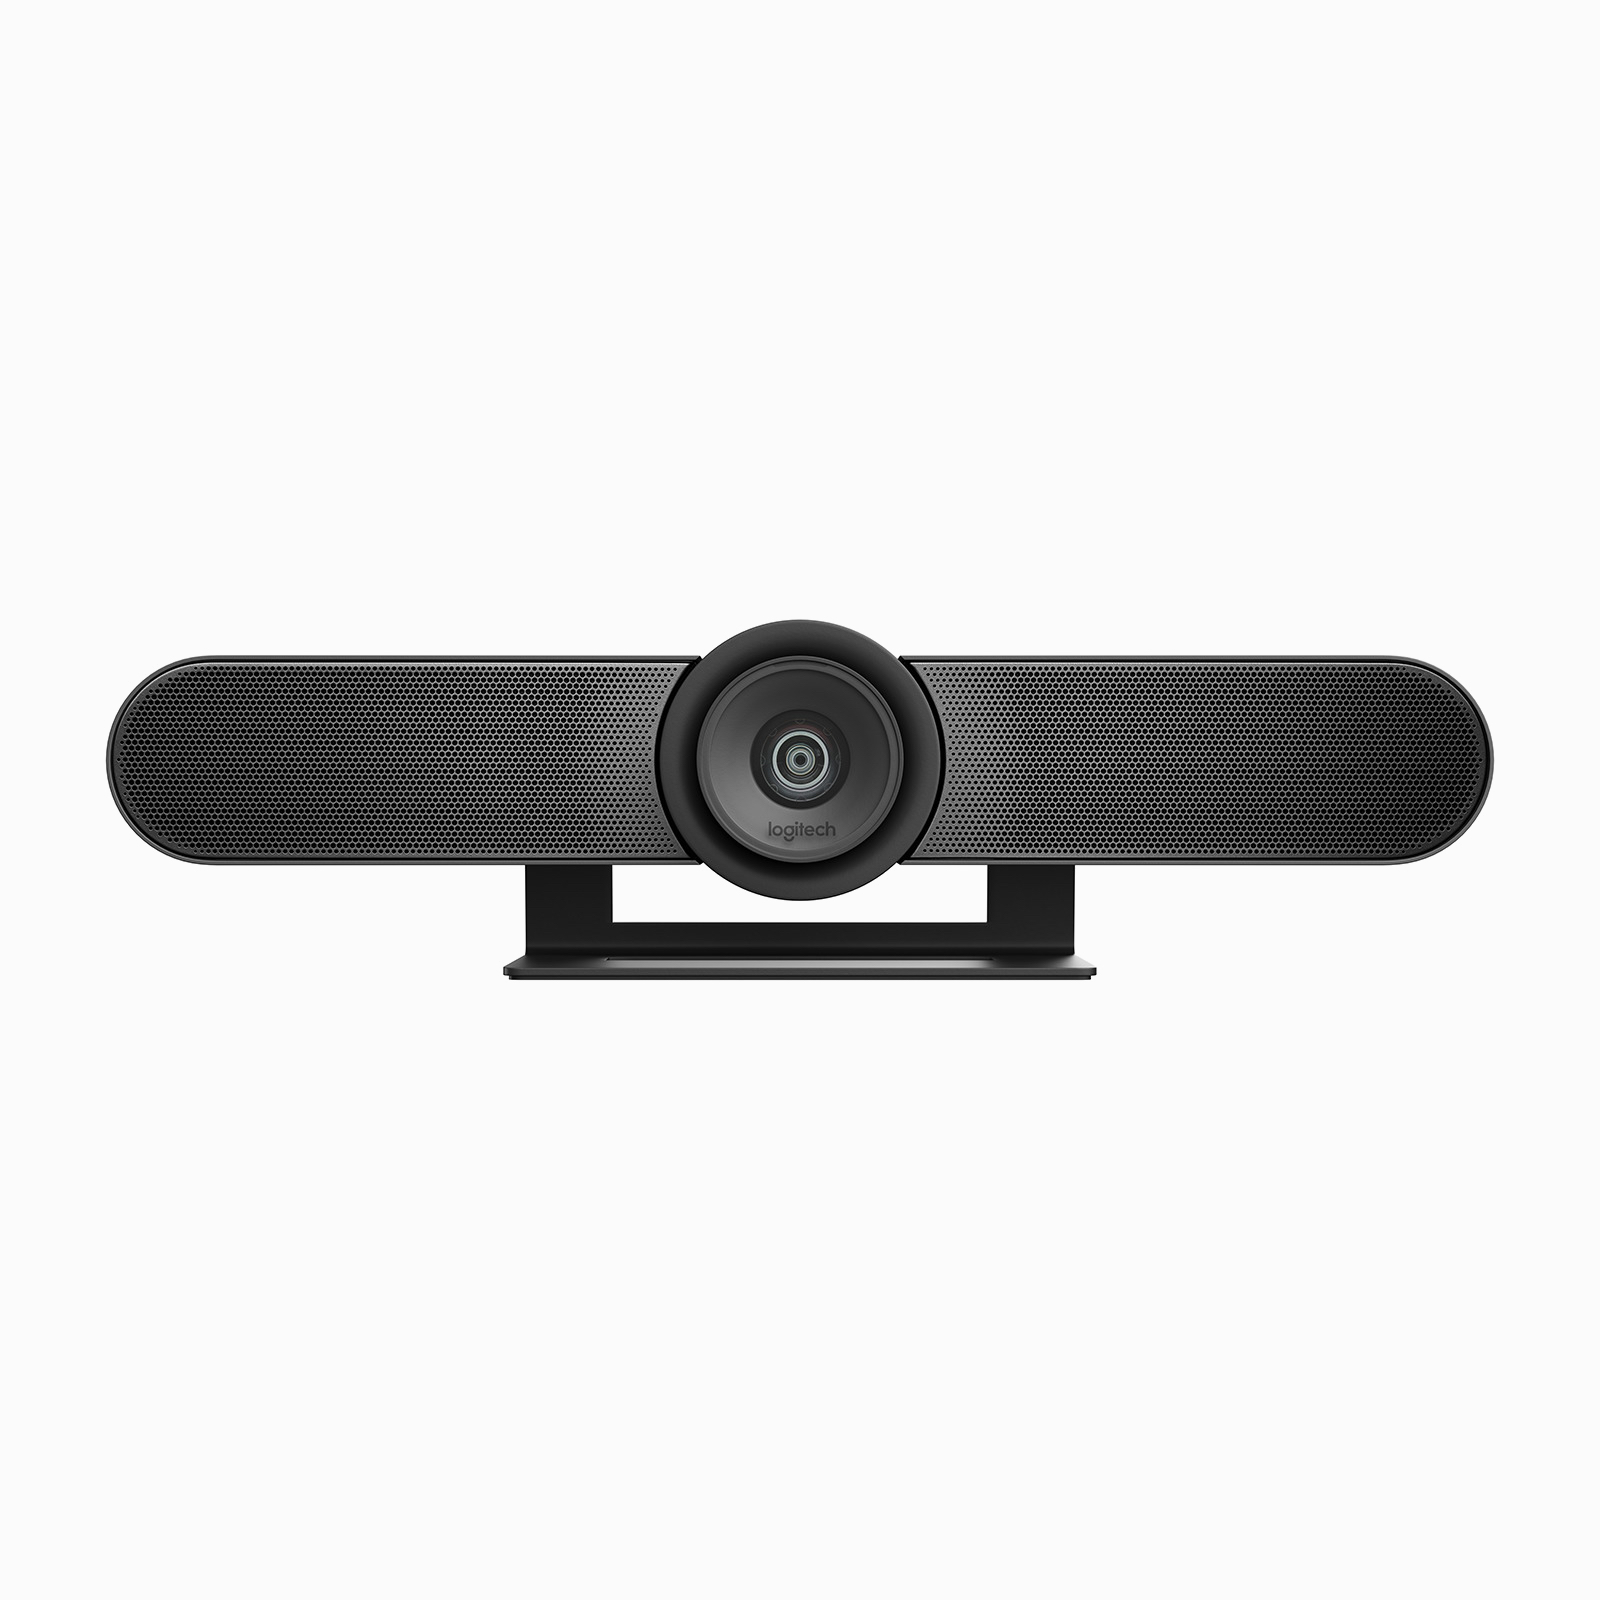 A Logitech MeetUp Camera in black, viewed from the front.